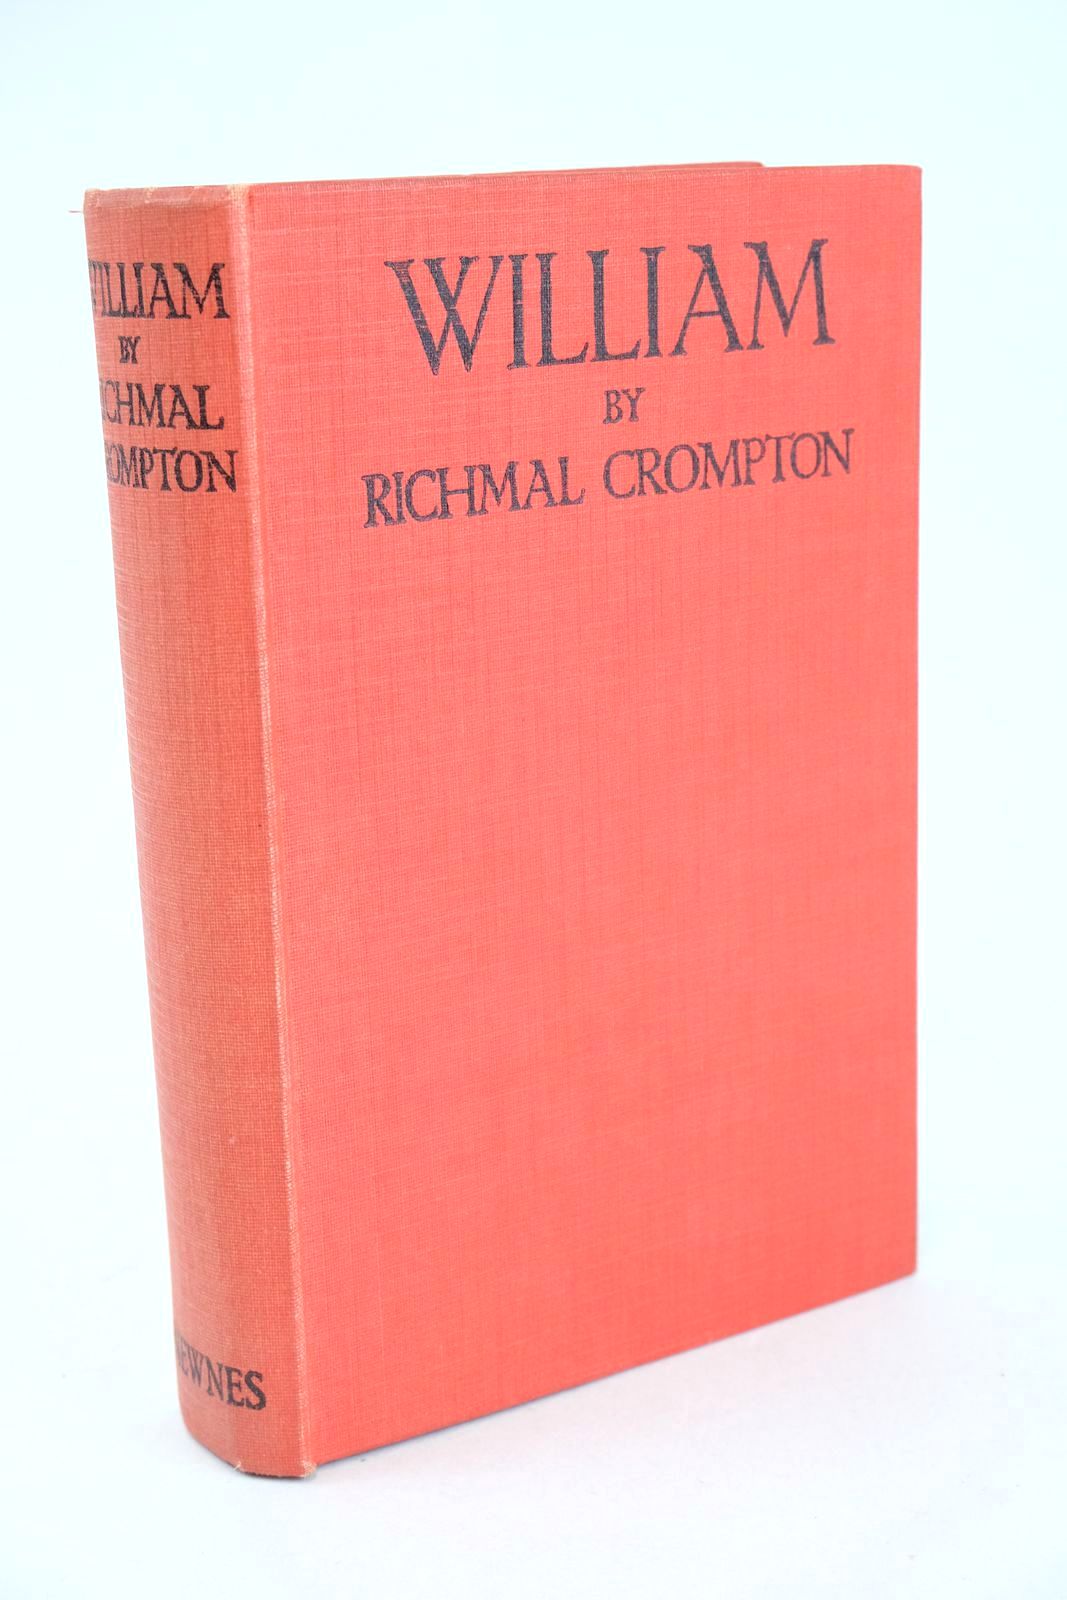 Photo of WILLIAM written by Crompton, Richmal illustrated by Henry, Thomas published by George Newnes Limited (STOCK CODE: 1325585)  for sale by Stella & Rose's Books